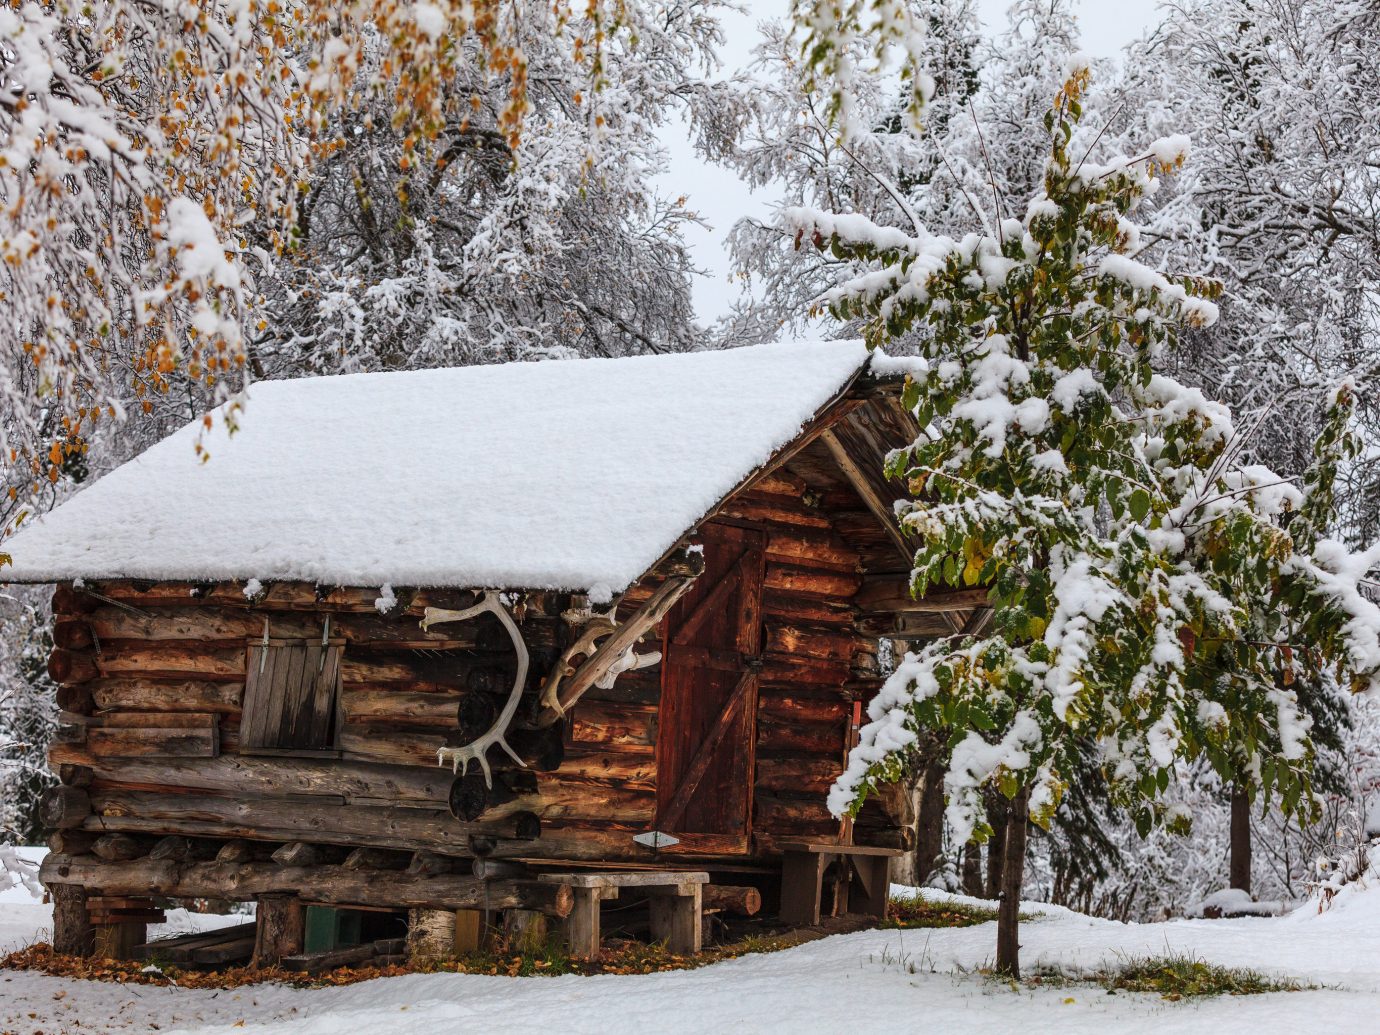 Trip Ideas tree snow outdoor Winter weather building house season hut log cabin sugar house rural area shack wooden wood surrounded